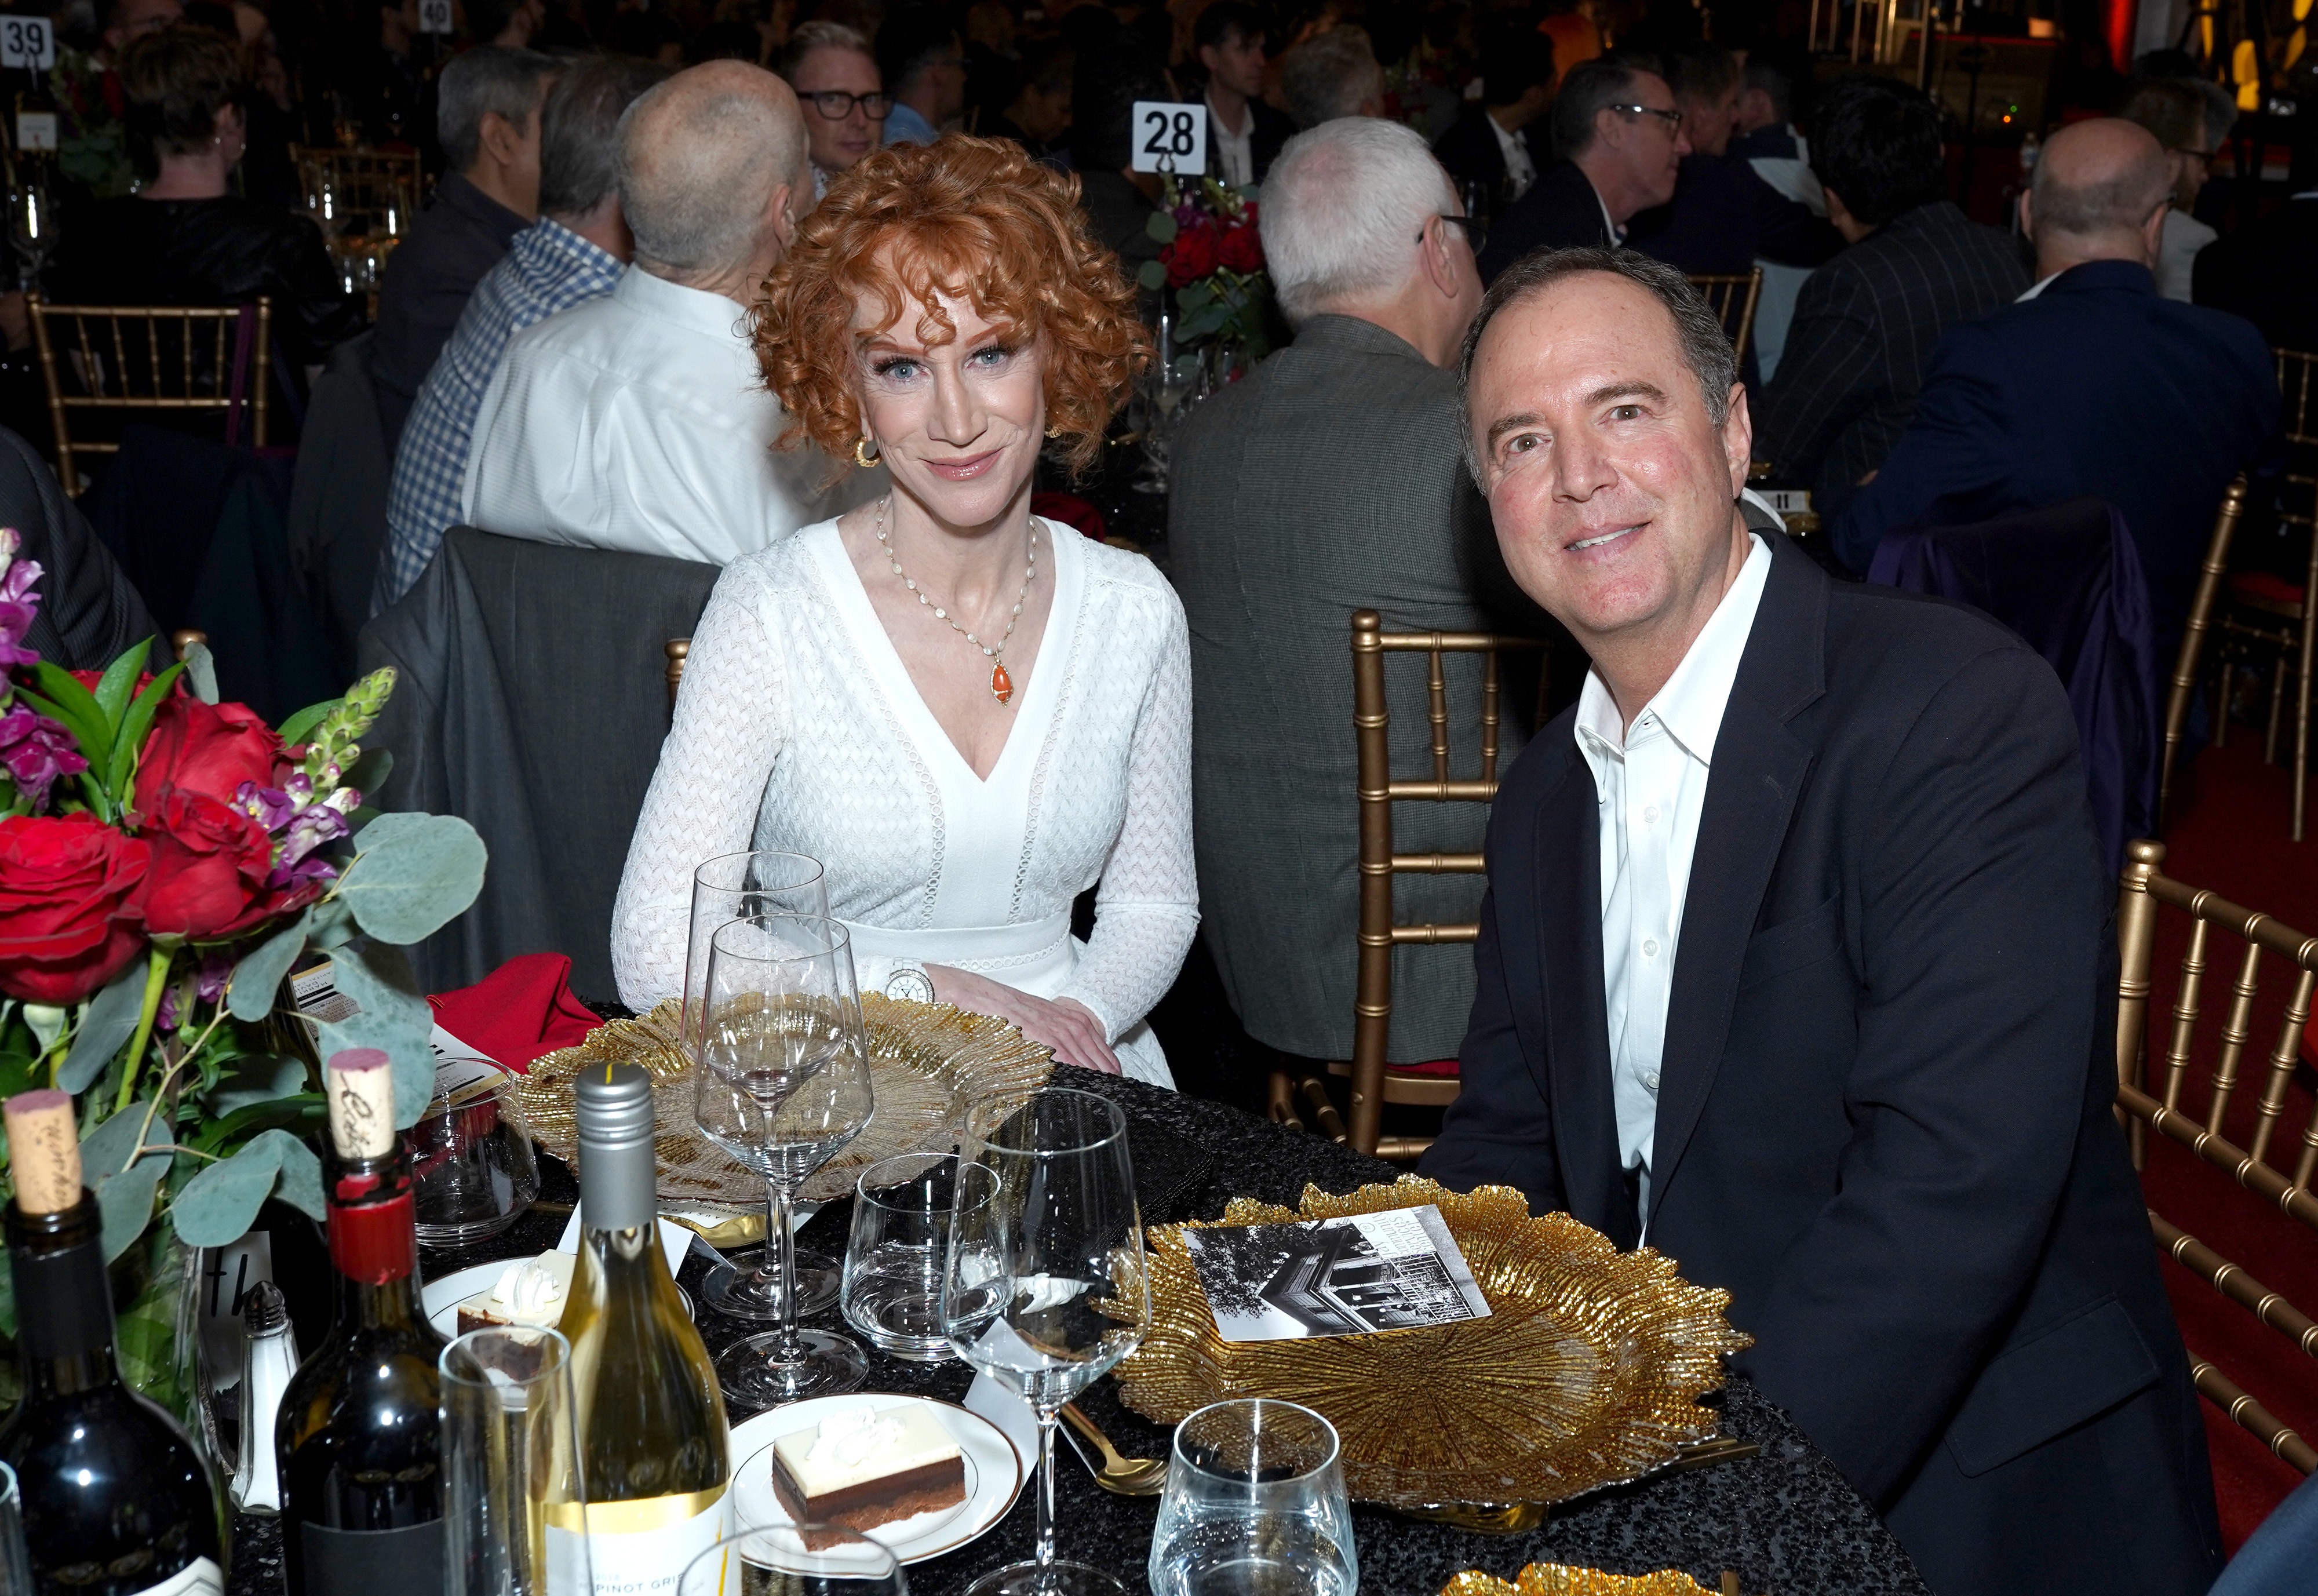 Kathy Griffin at Los Angeles LGBT Center Celebrates 50th Anniversary With "Hearts Of Gold" Concert